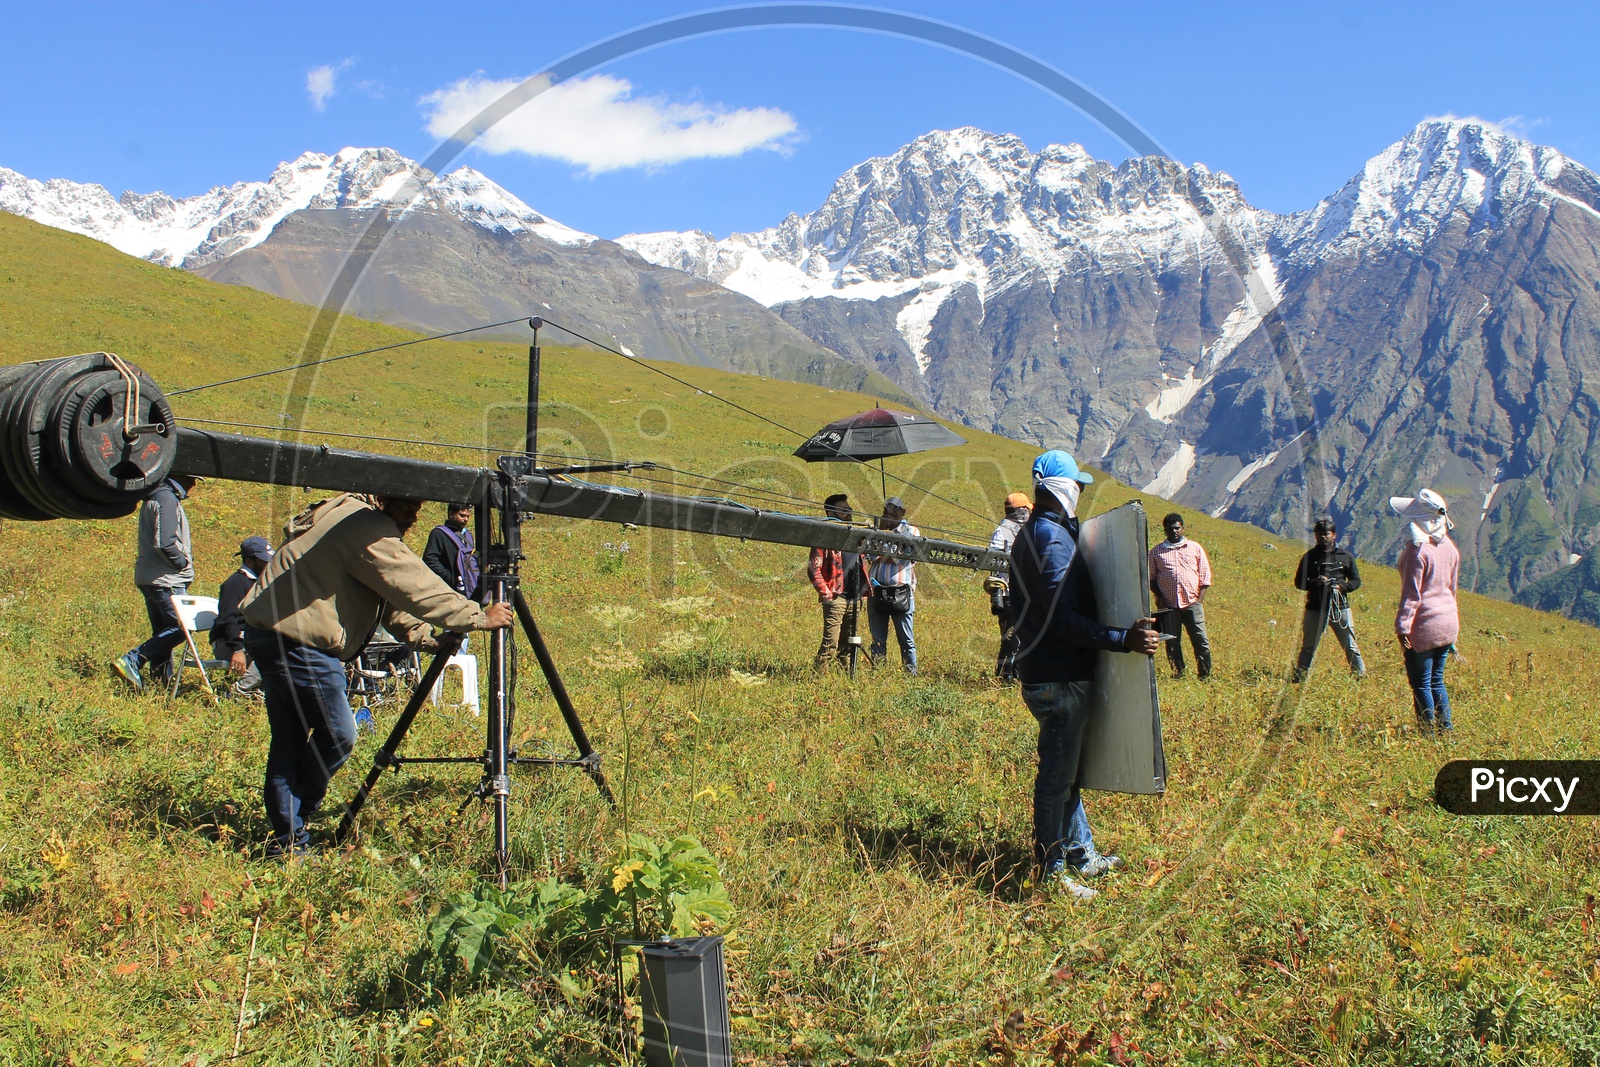 Movie shooting by the Swiss Alps